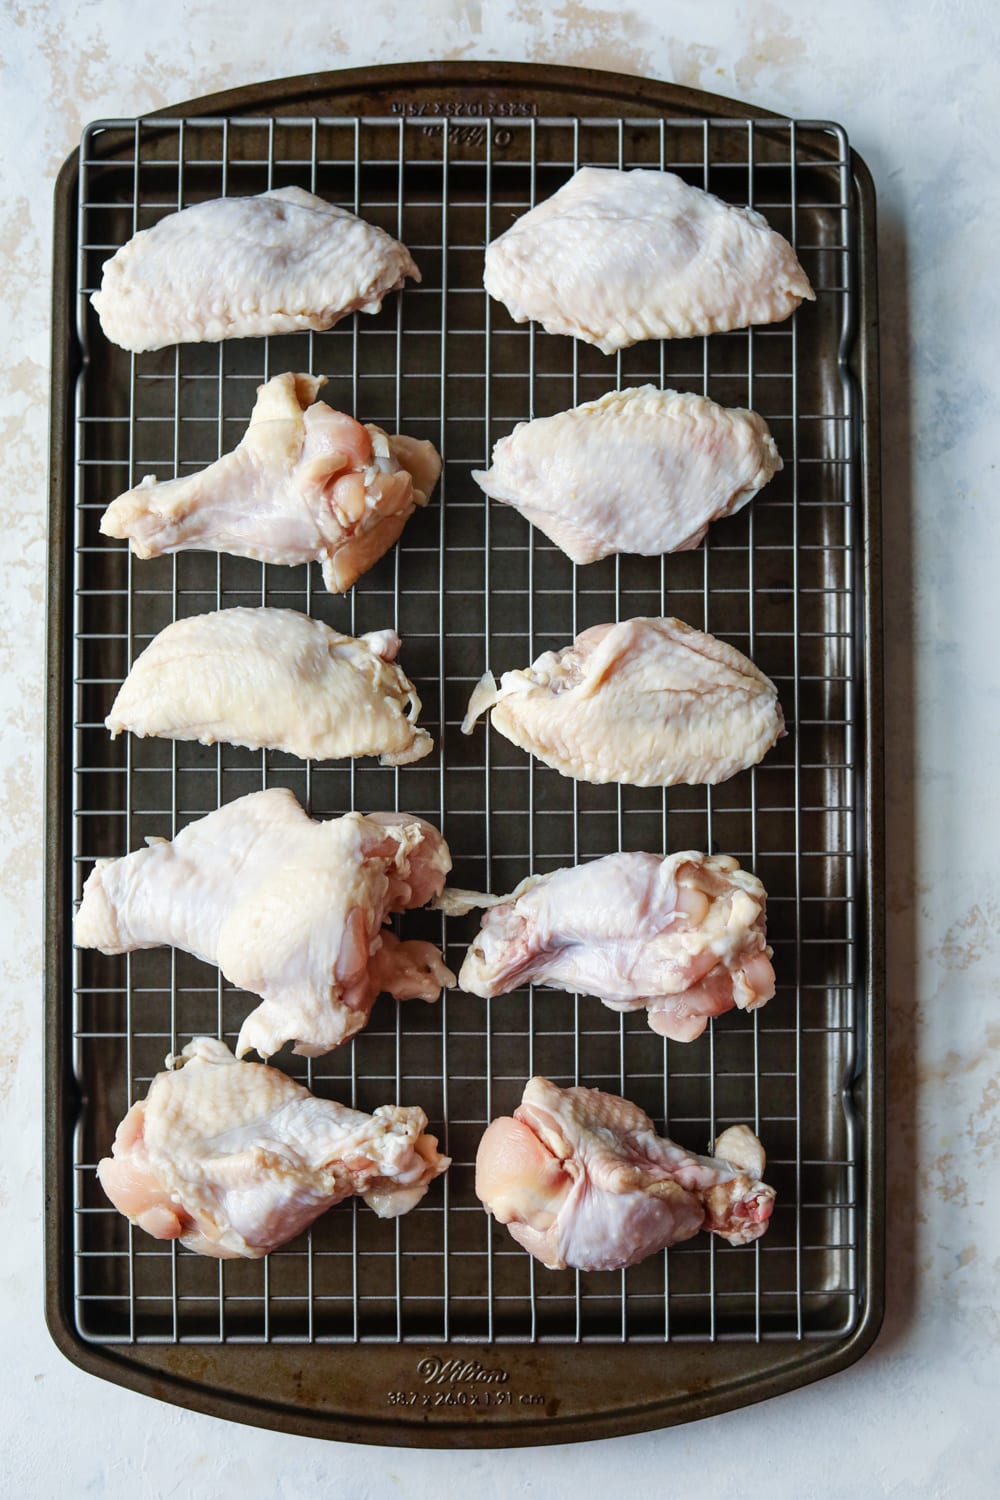 Uncooked chicken wings on a wire rack placed over baking sheet.